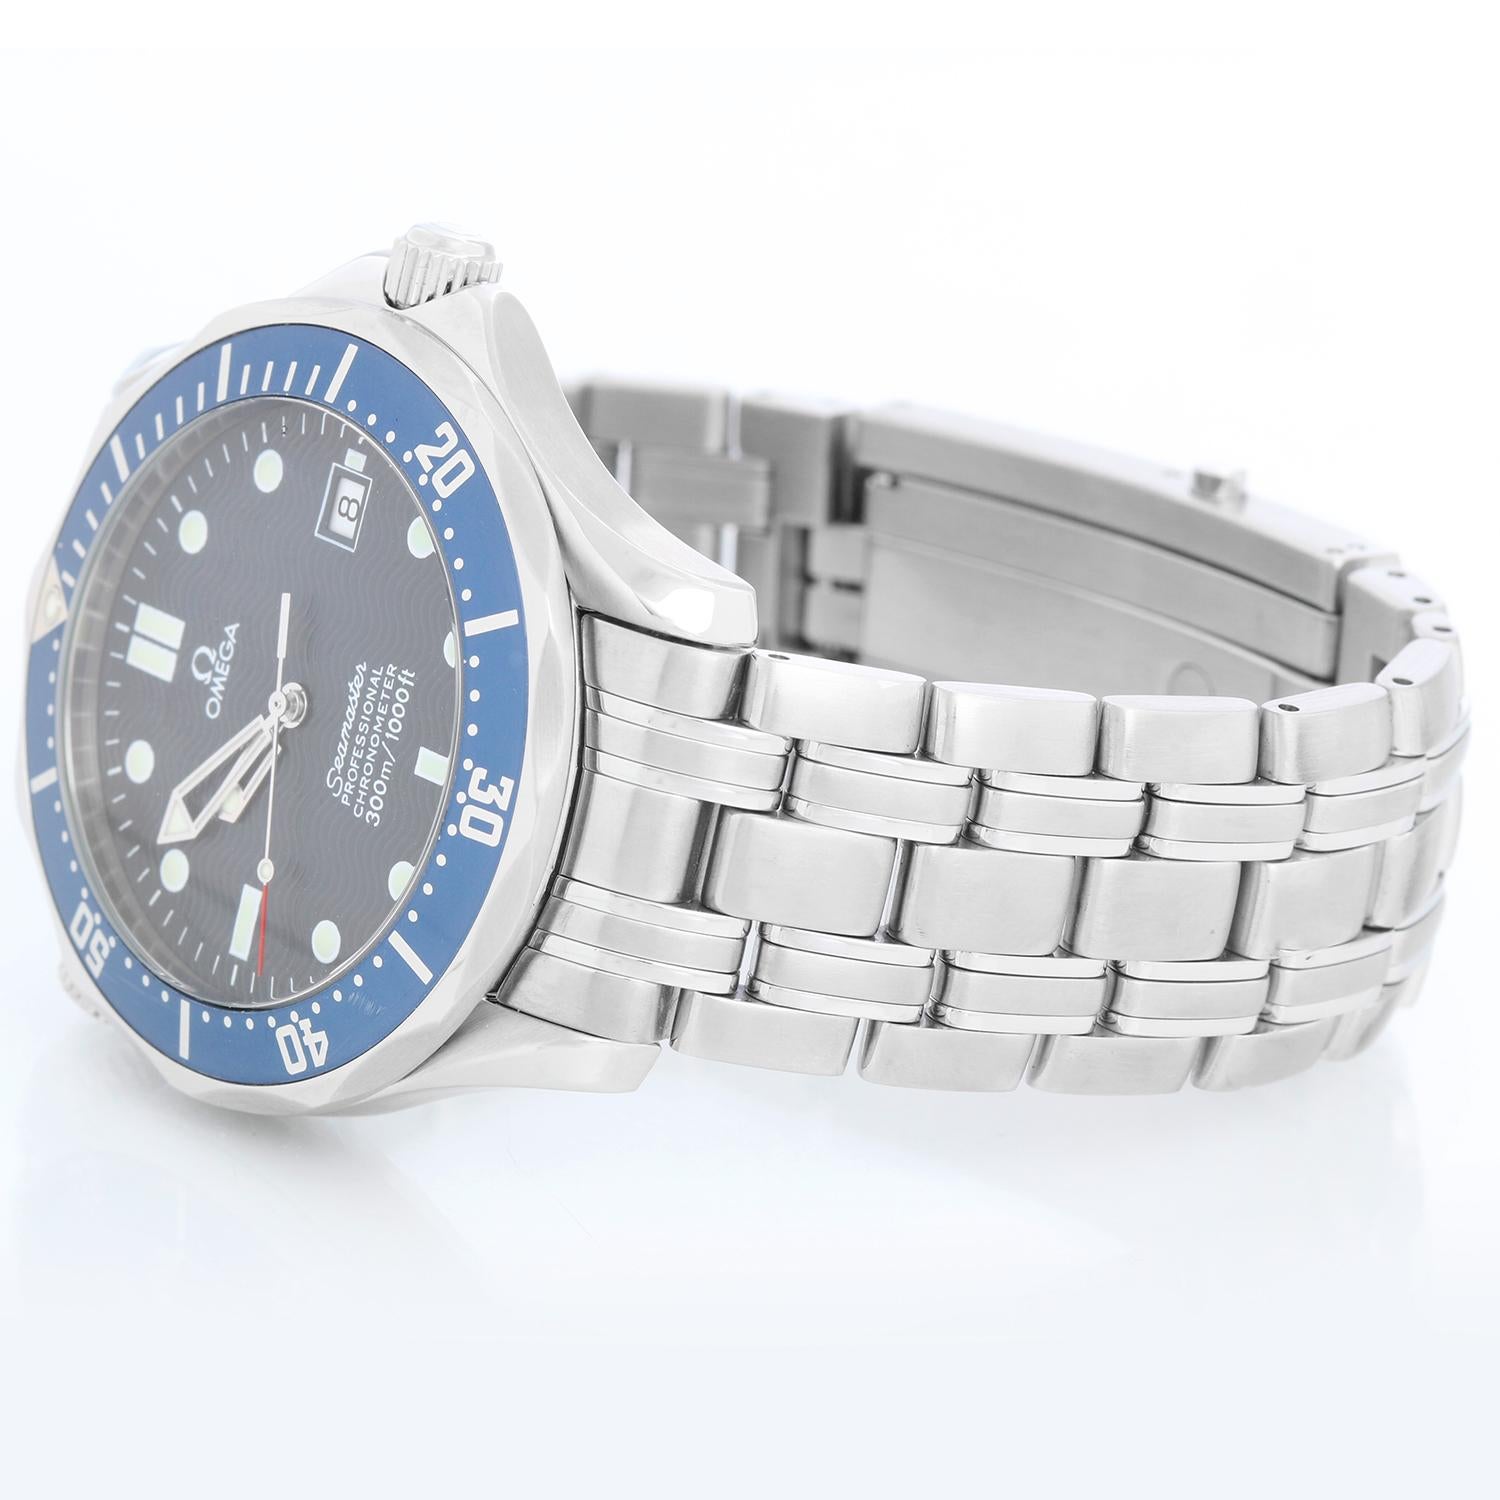 Omega Seamaster Professional Stainless Steel 300M  Divers Watch 2531.80.00 - Automatic winding. Stainless steel case with rotating bezel with blue insert (41mm diameter). Blue dial with luminous style markers. Stainless steel bracelet. Pre-owned